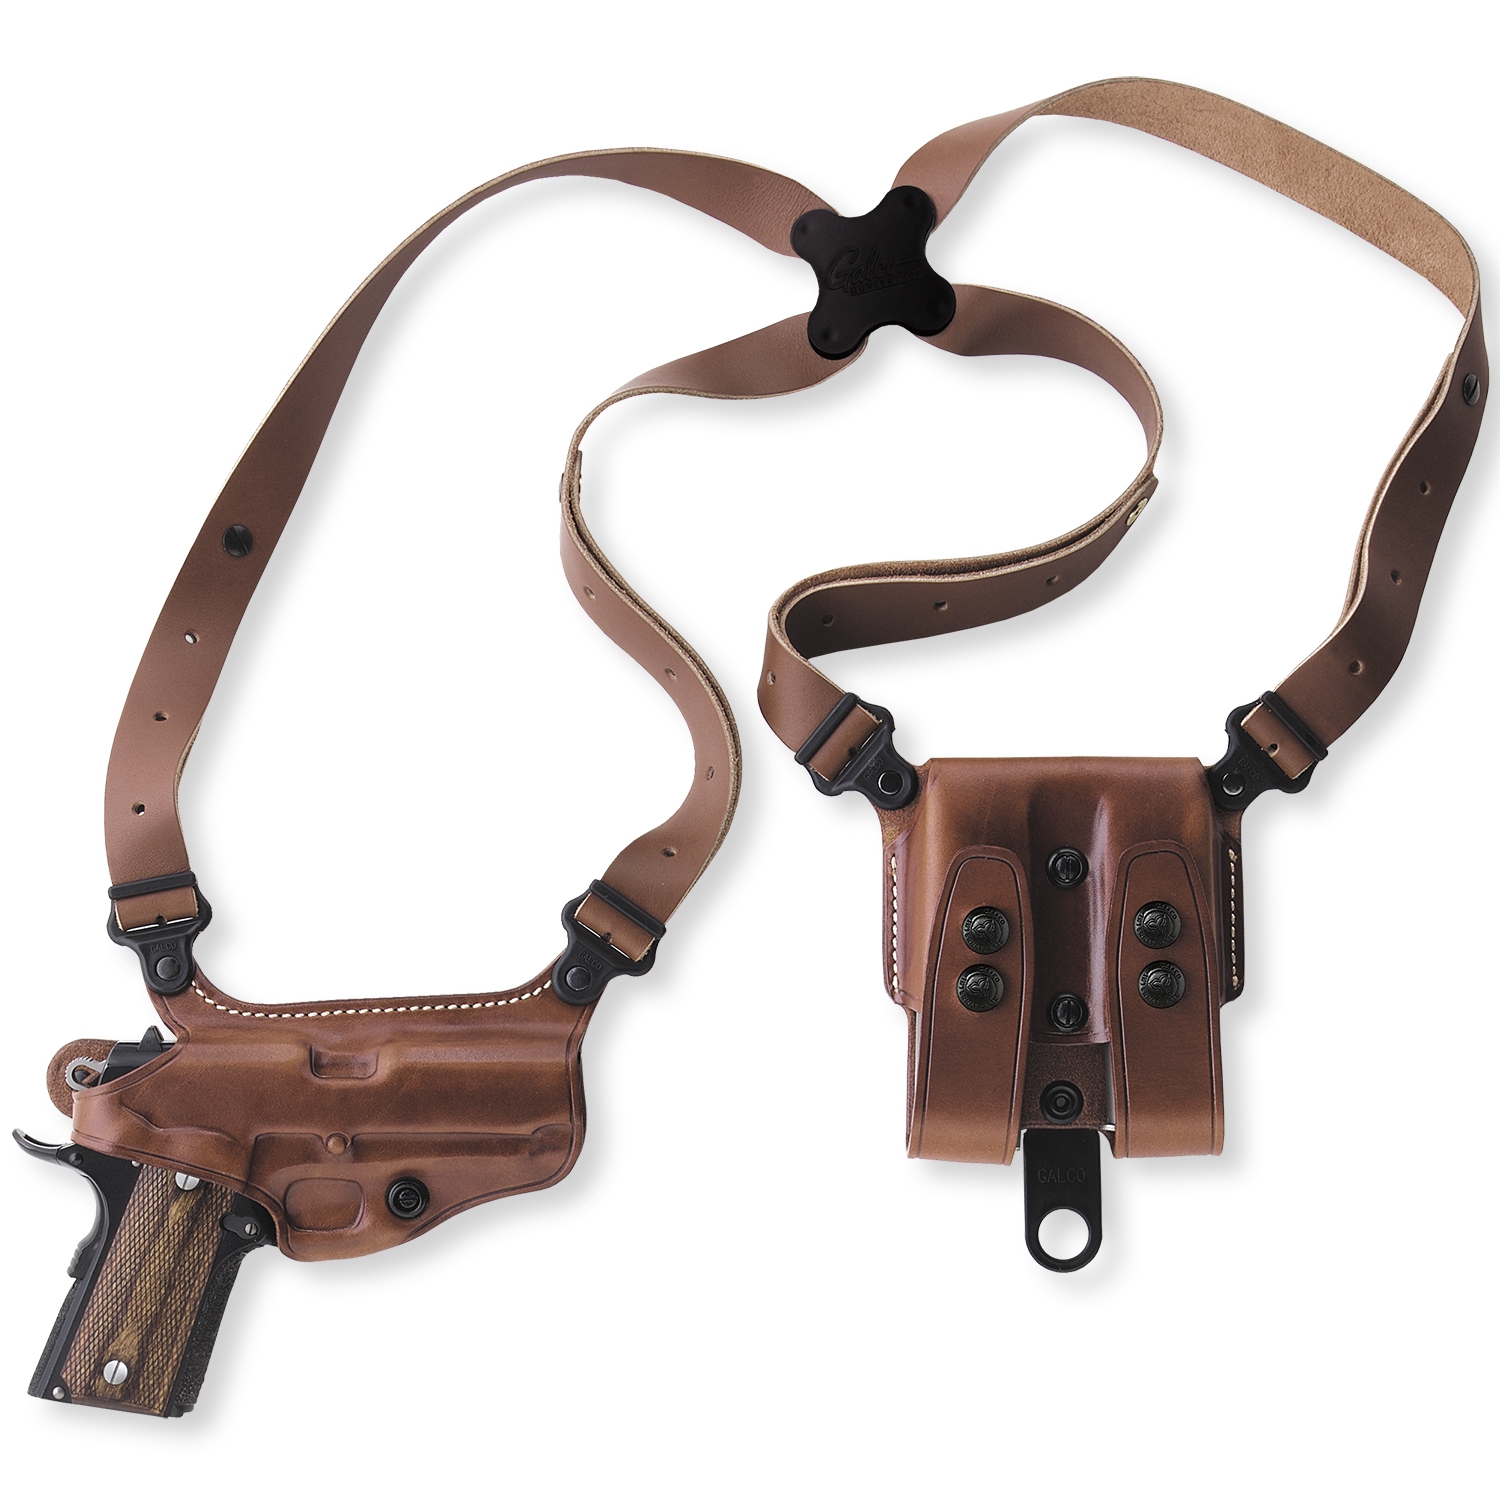 Galco Holster Fit Chart